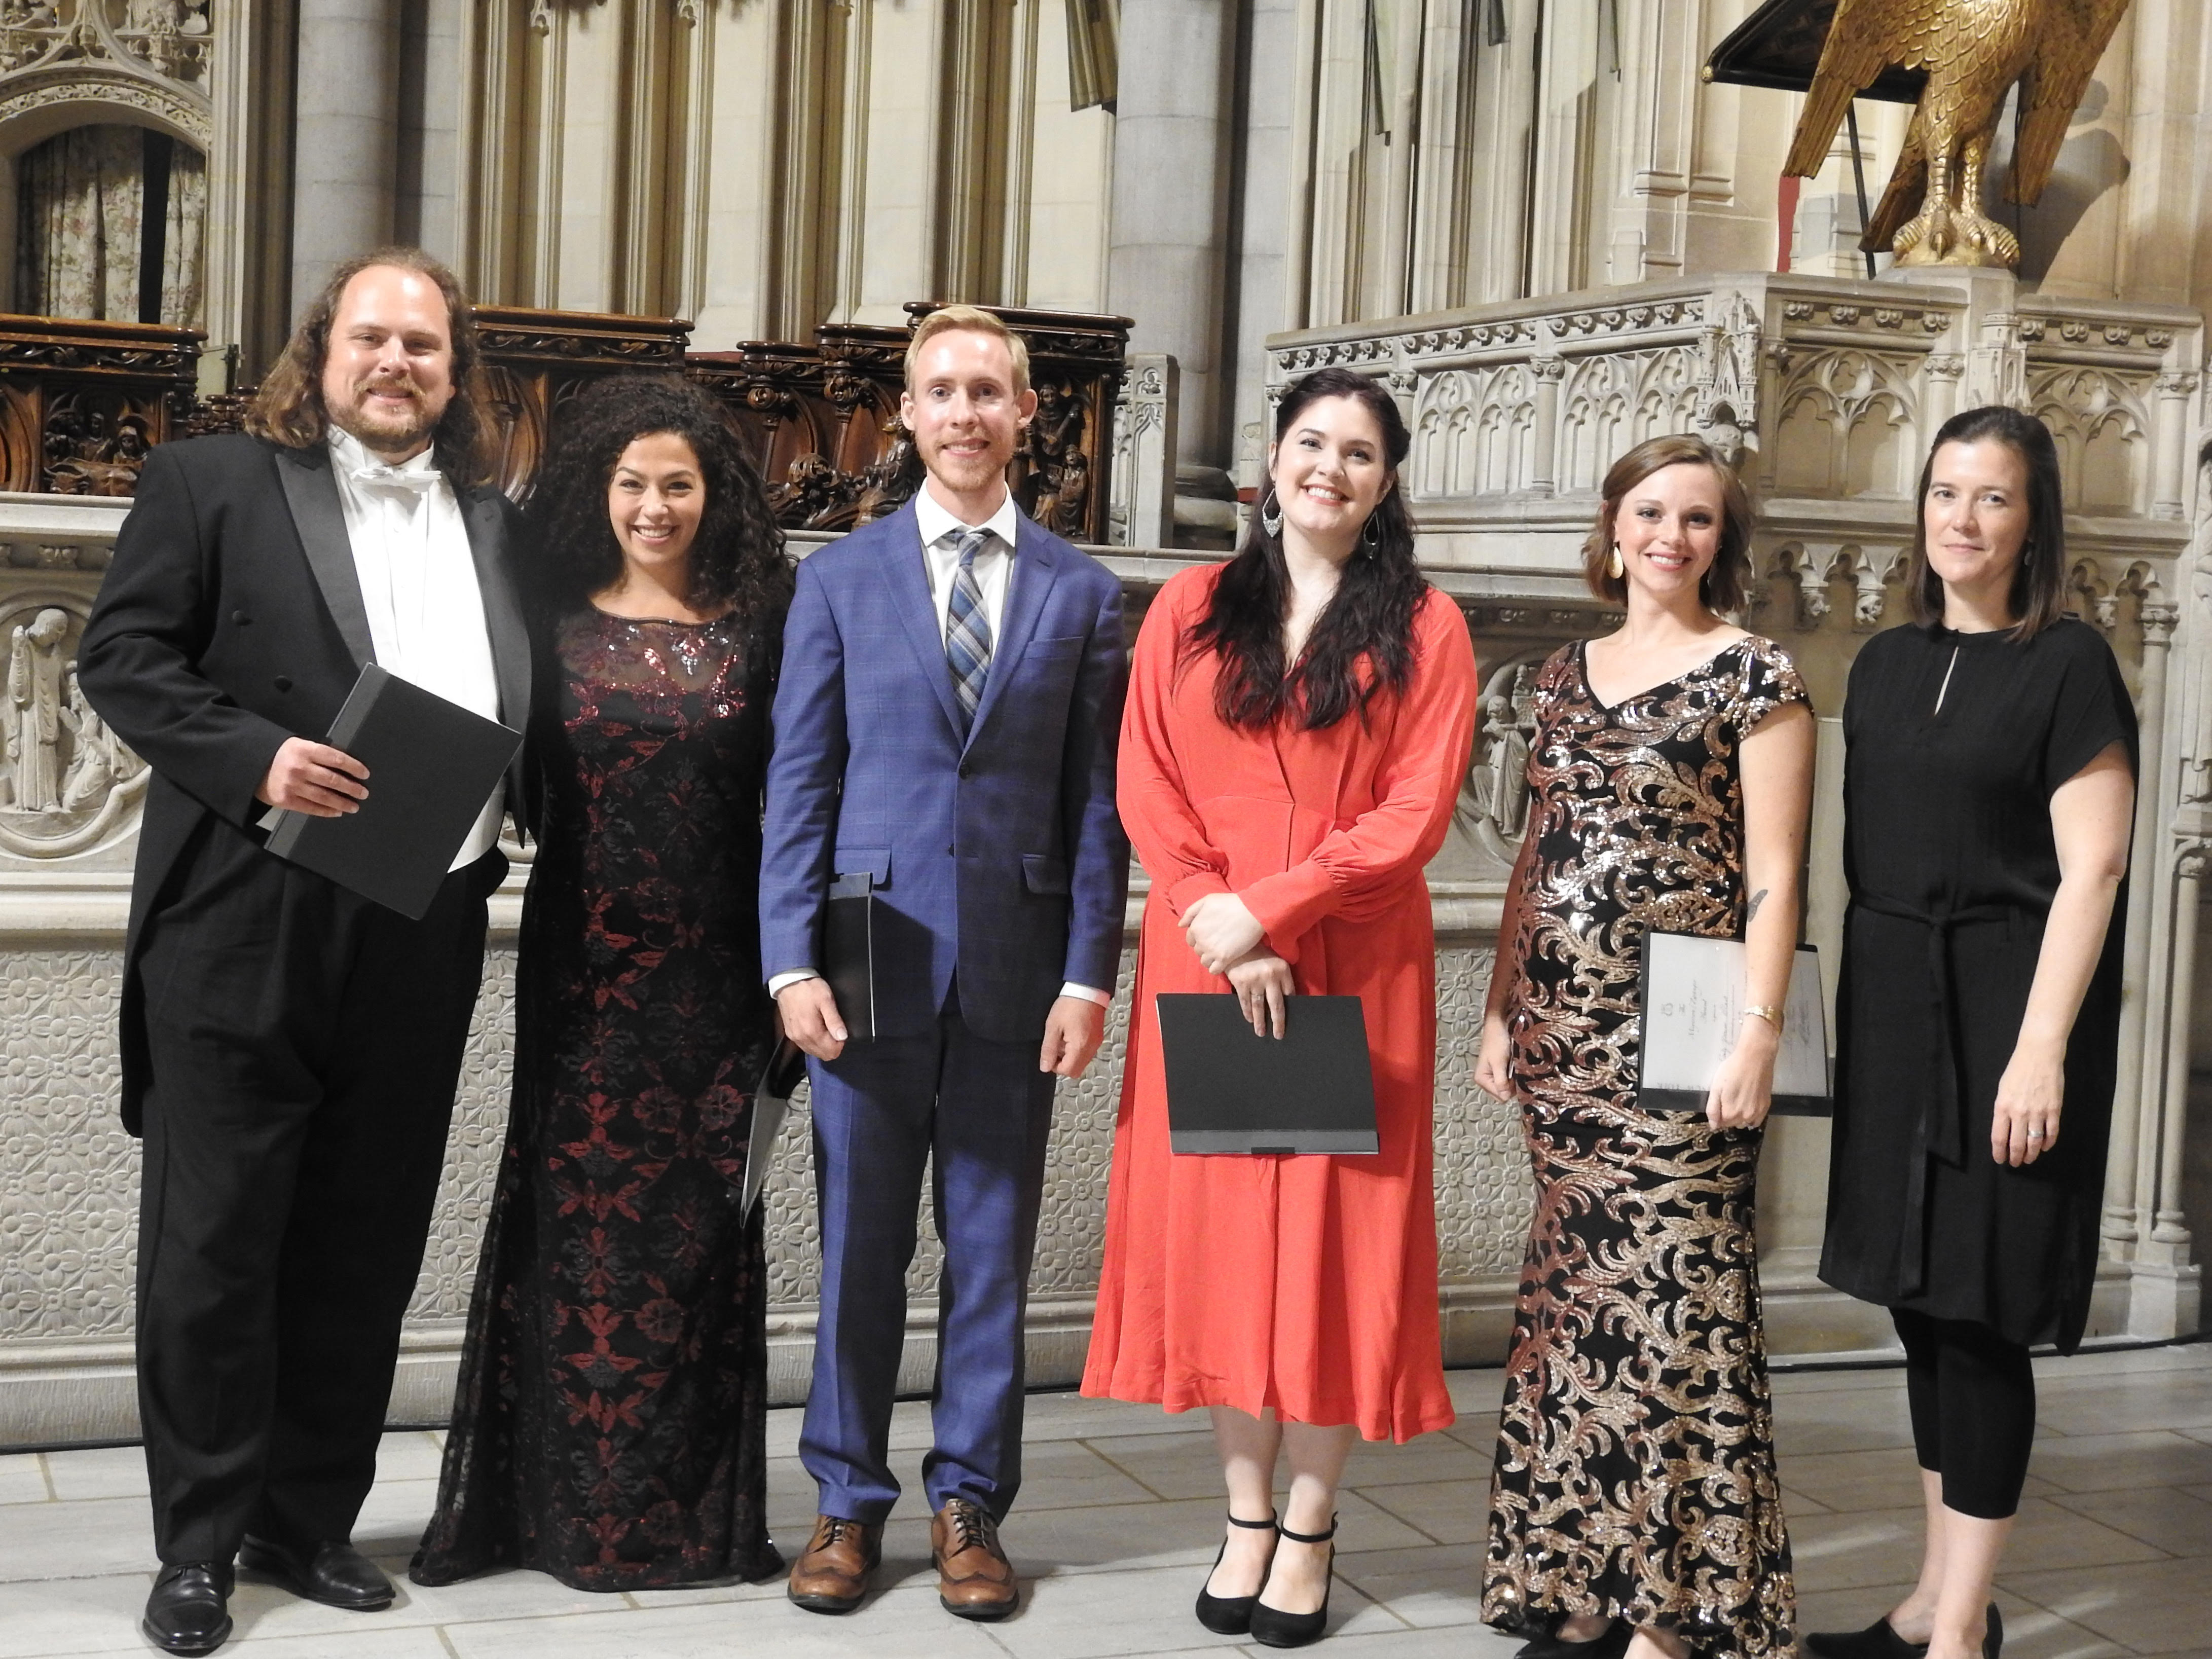 Image of Finalists for the Oratorio Society of New York Awards